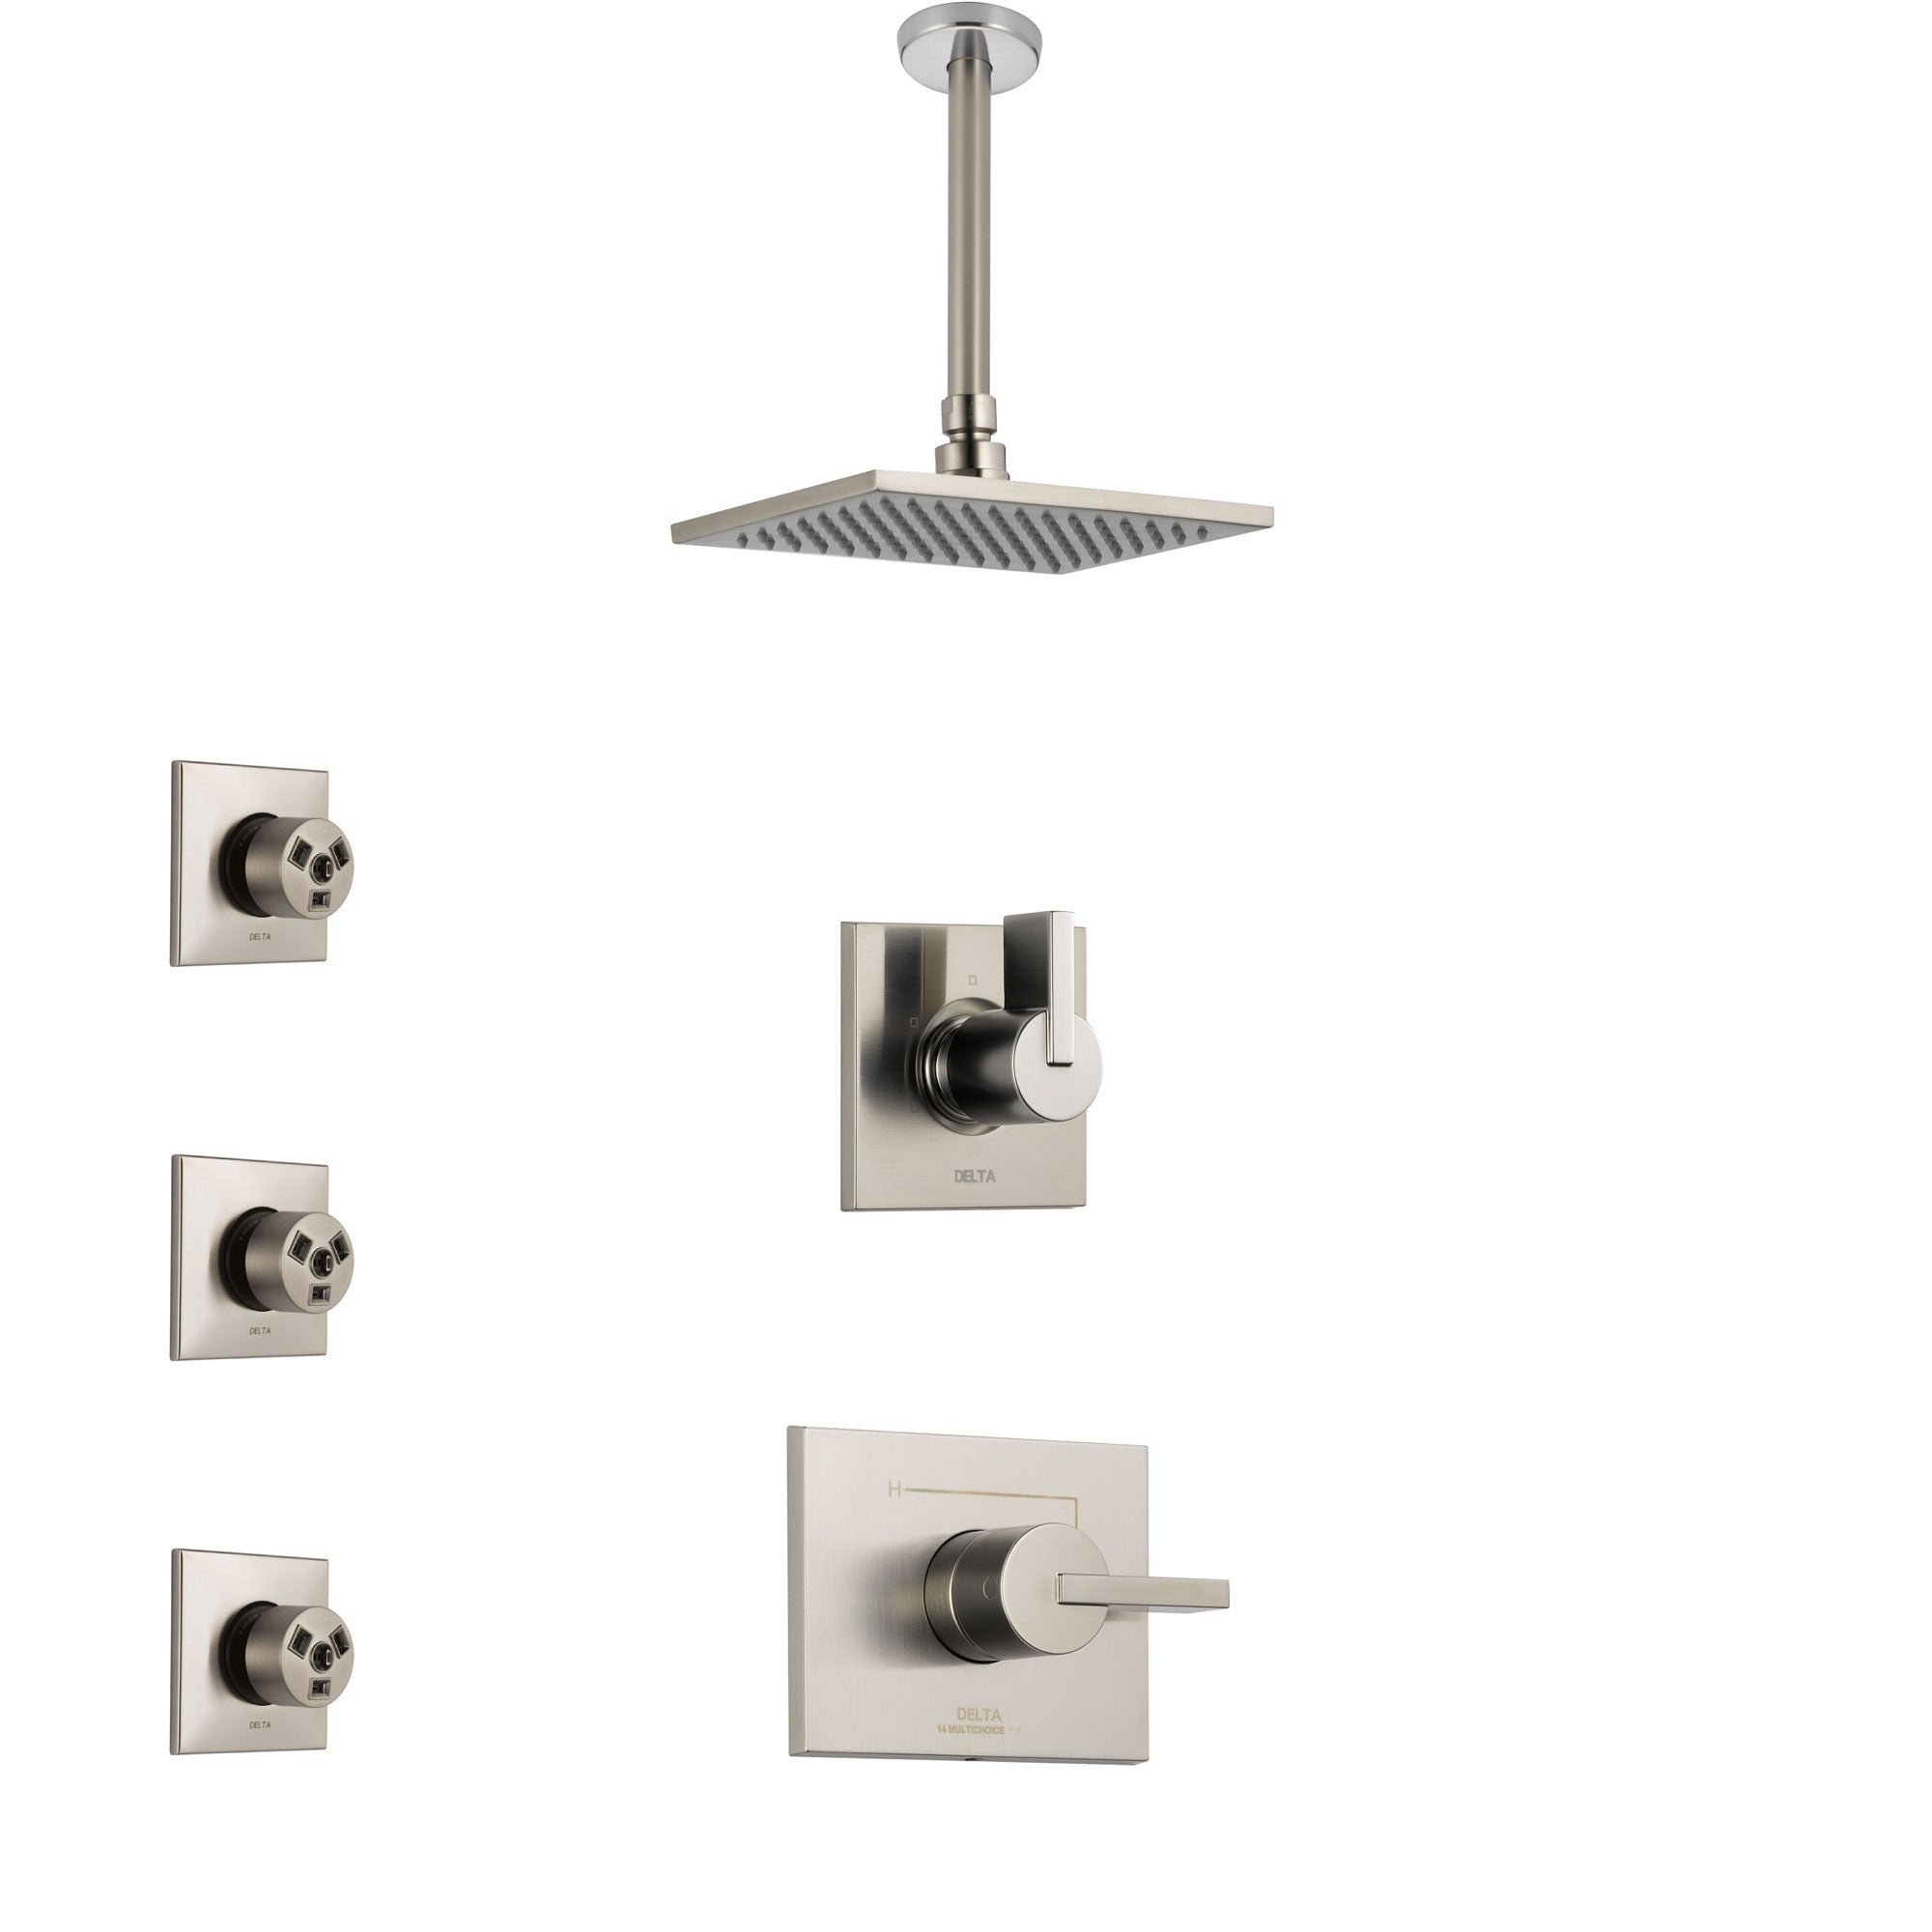 Delta Vero Stainless Steel Finish Shower System with Control Handle, 3-Setting Diverter, Ceiling Mount Showerhead, and 3 Body Sprays SS1453SS4